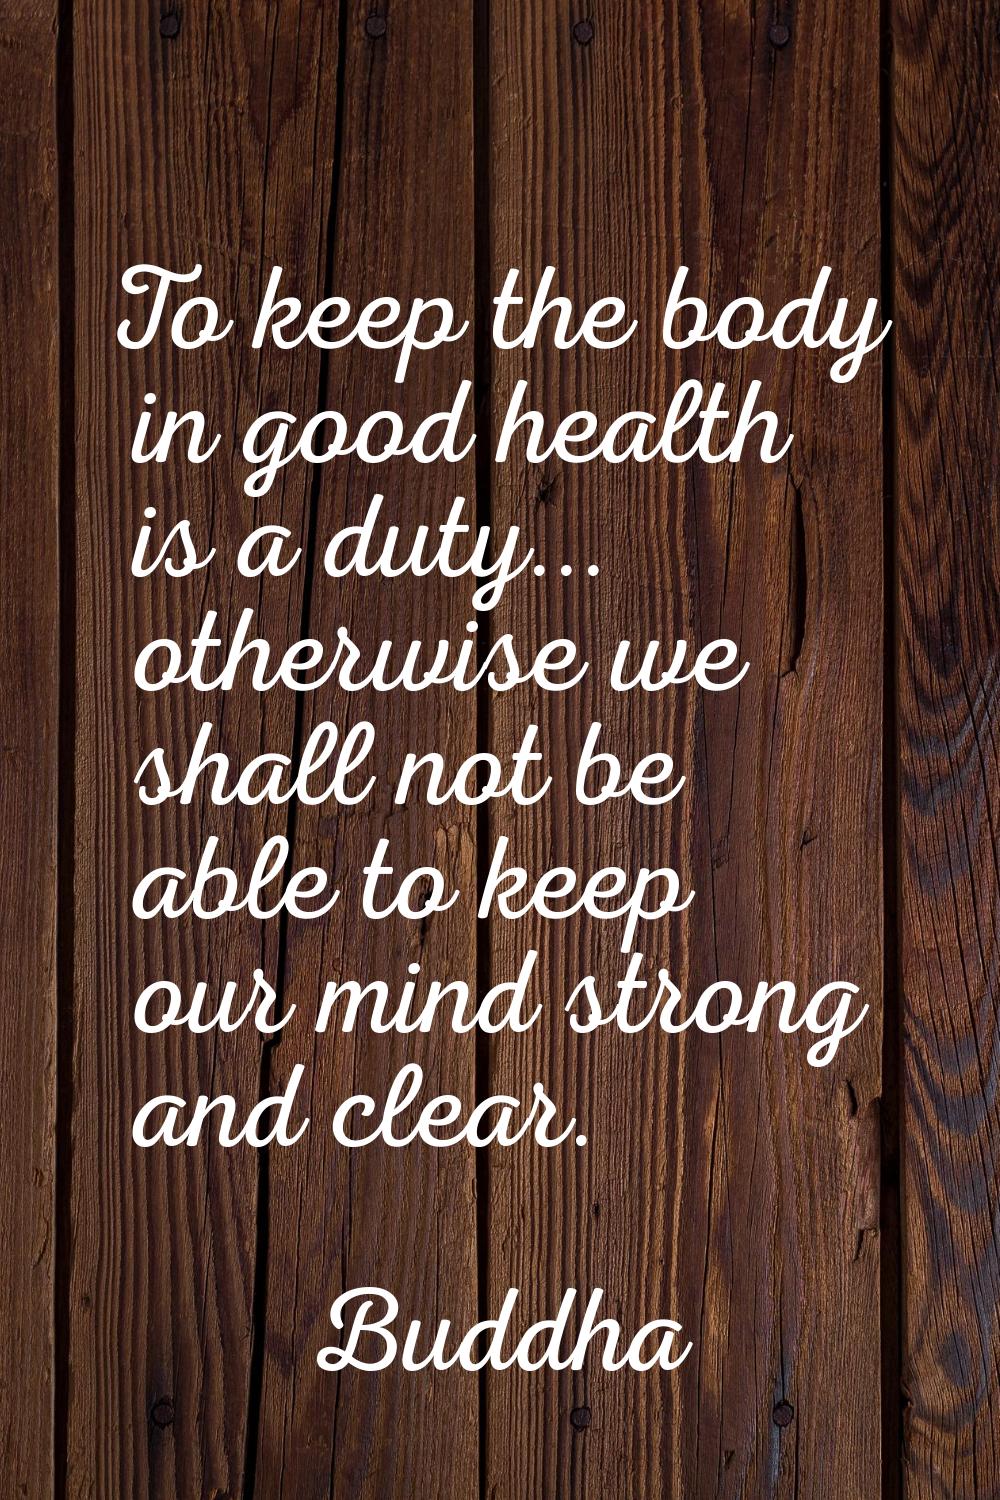 To keep the body in good health is a duty... otherwise we shall not be able to keep our mind strong